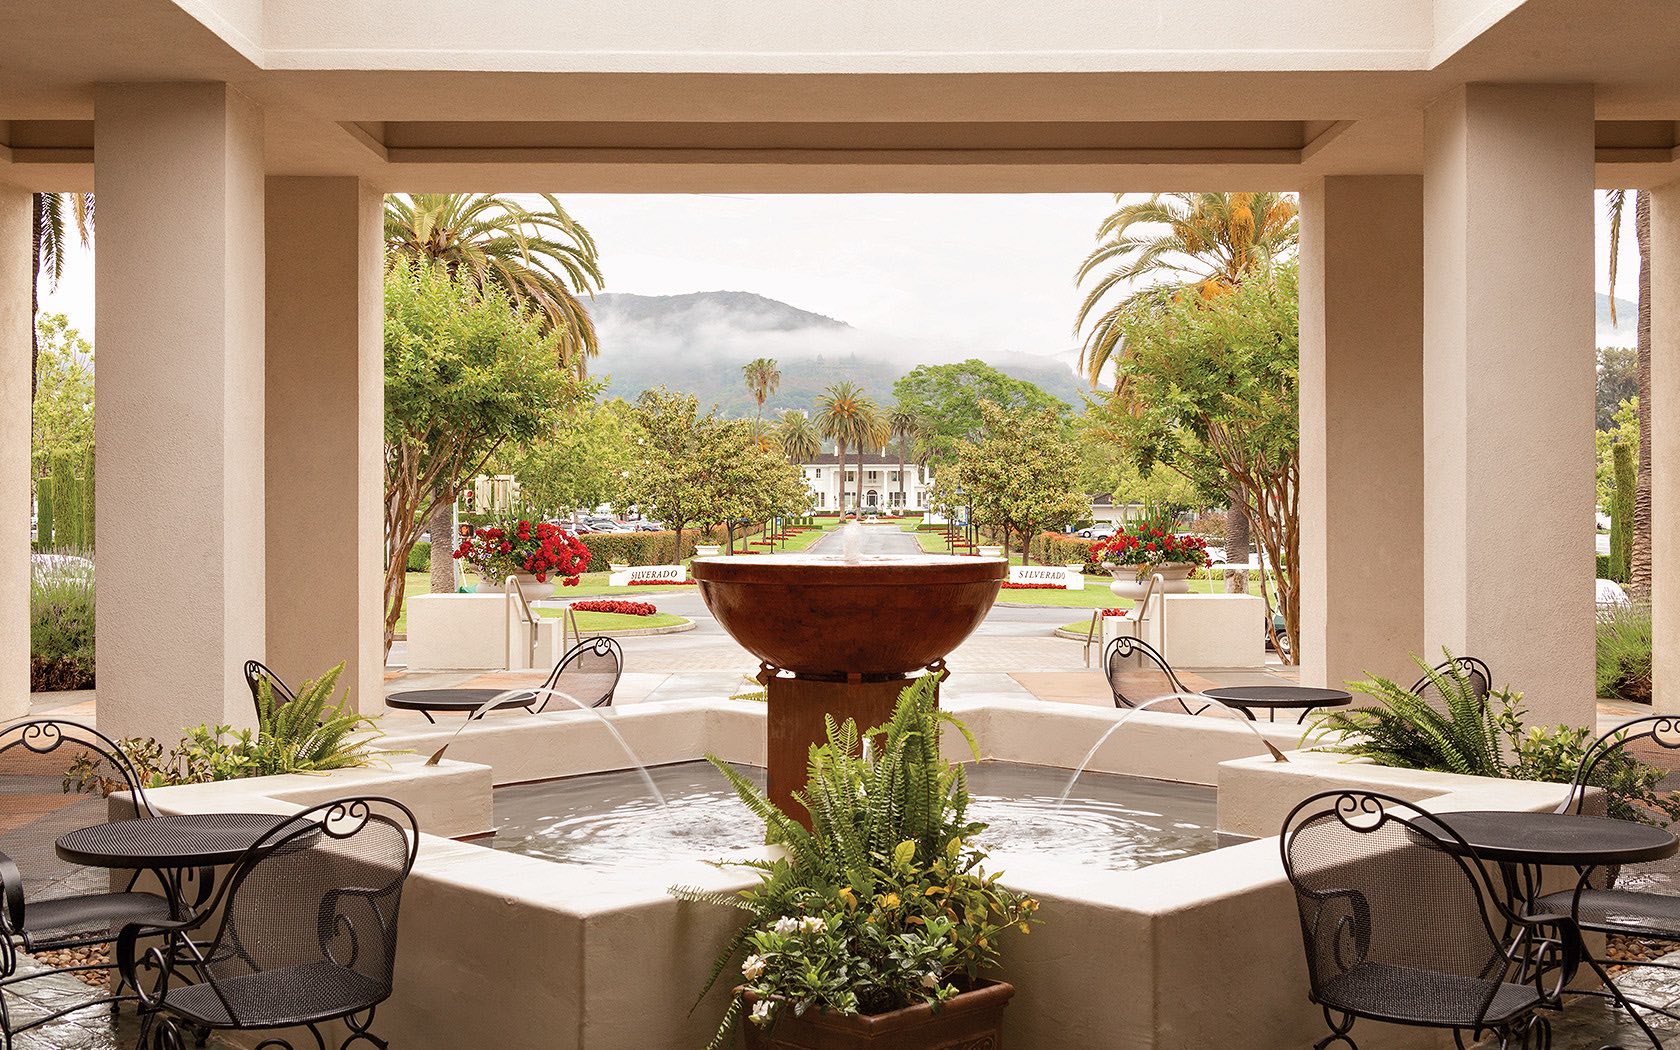 Tucked away in Napa Valley, The Silverado Resort and Spa is surrounded by unparalleled natural beauty.